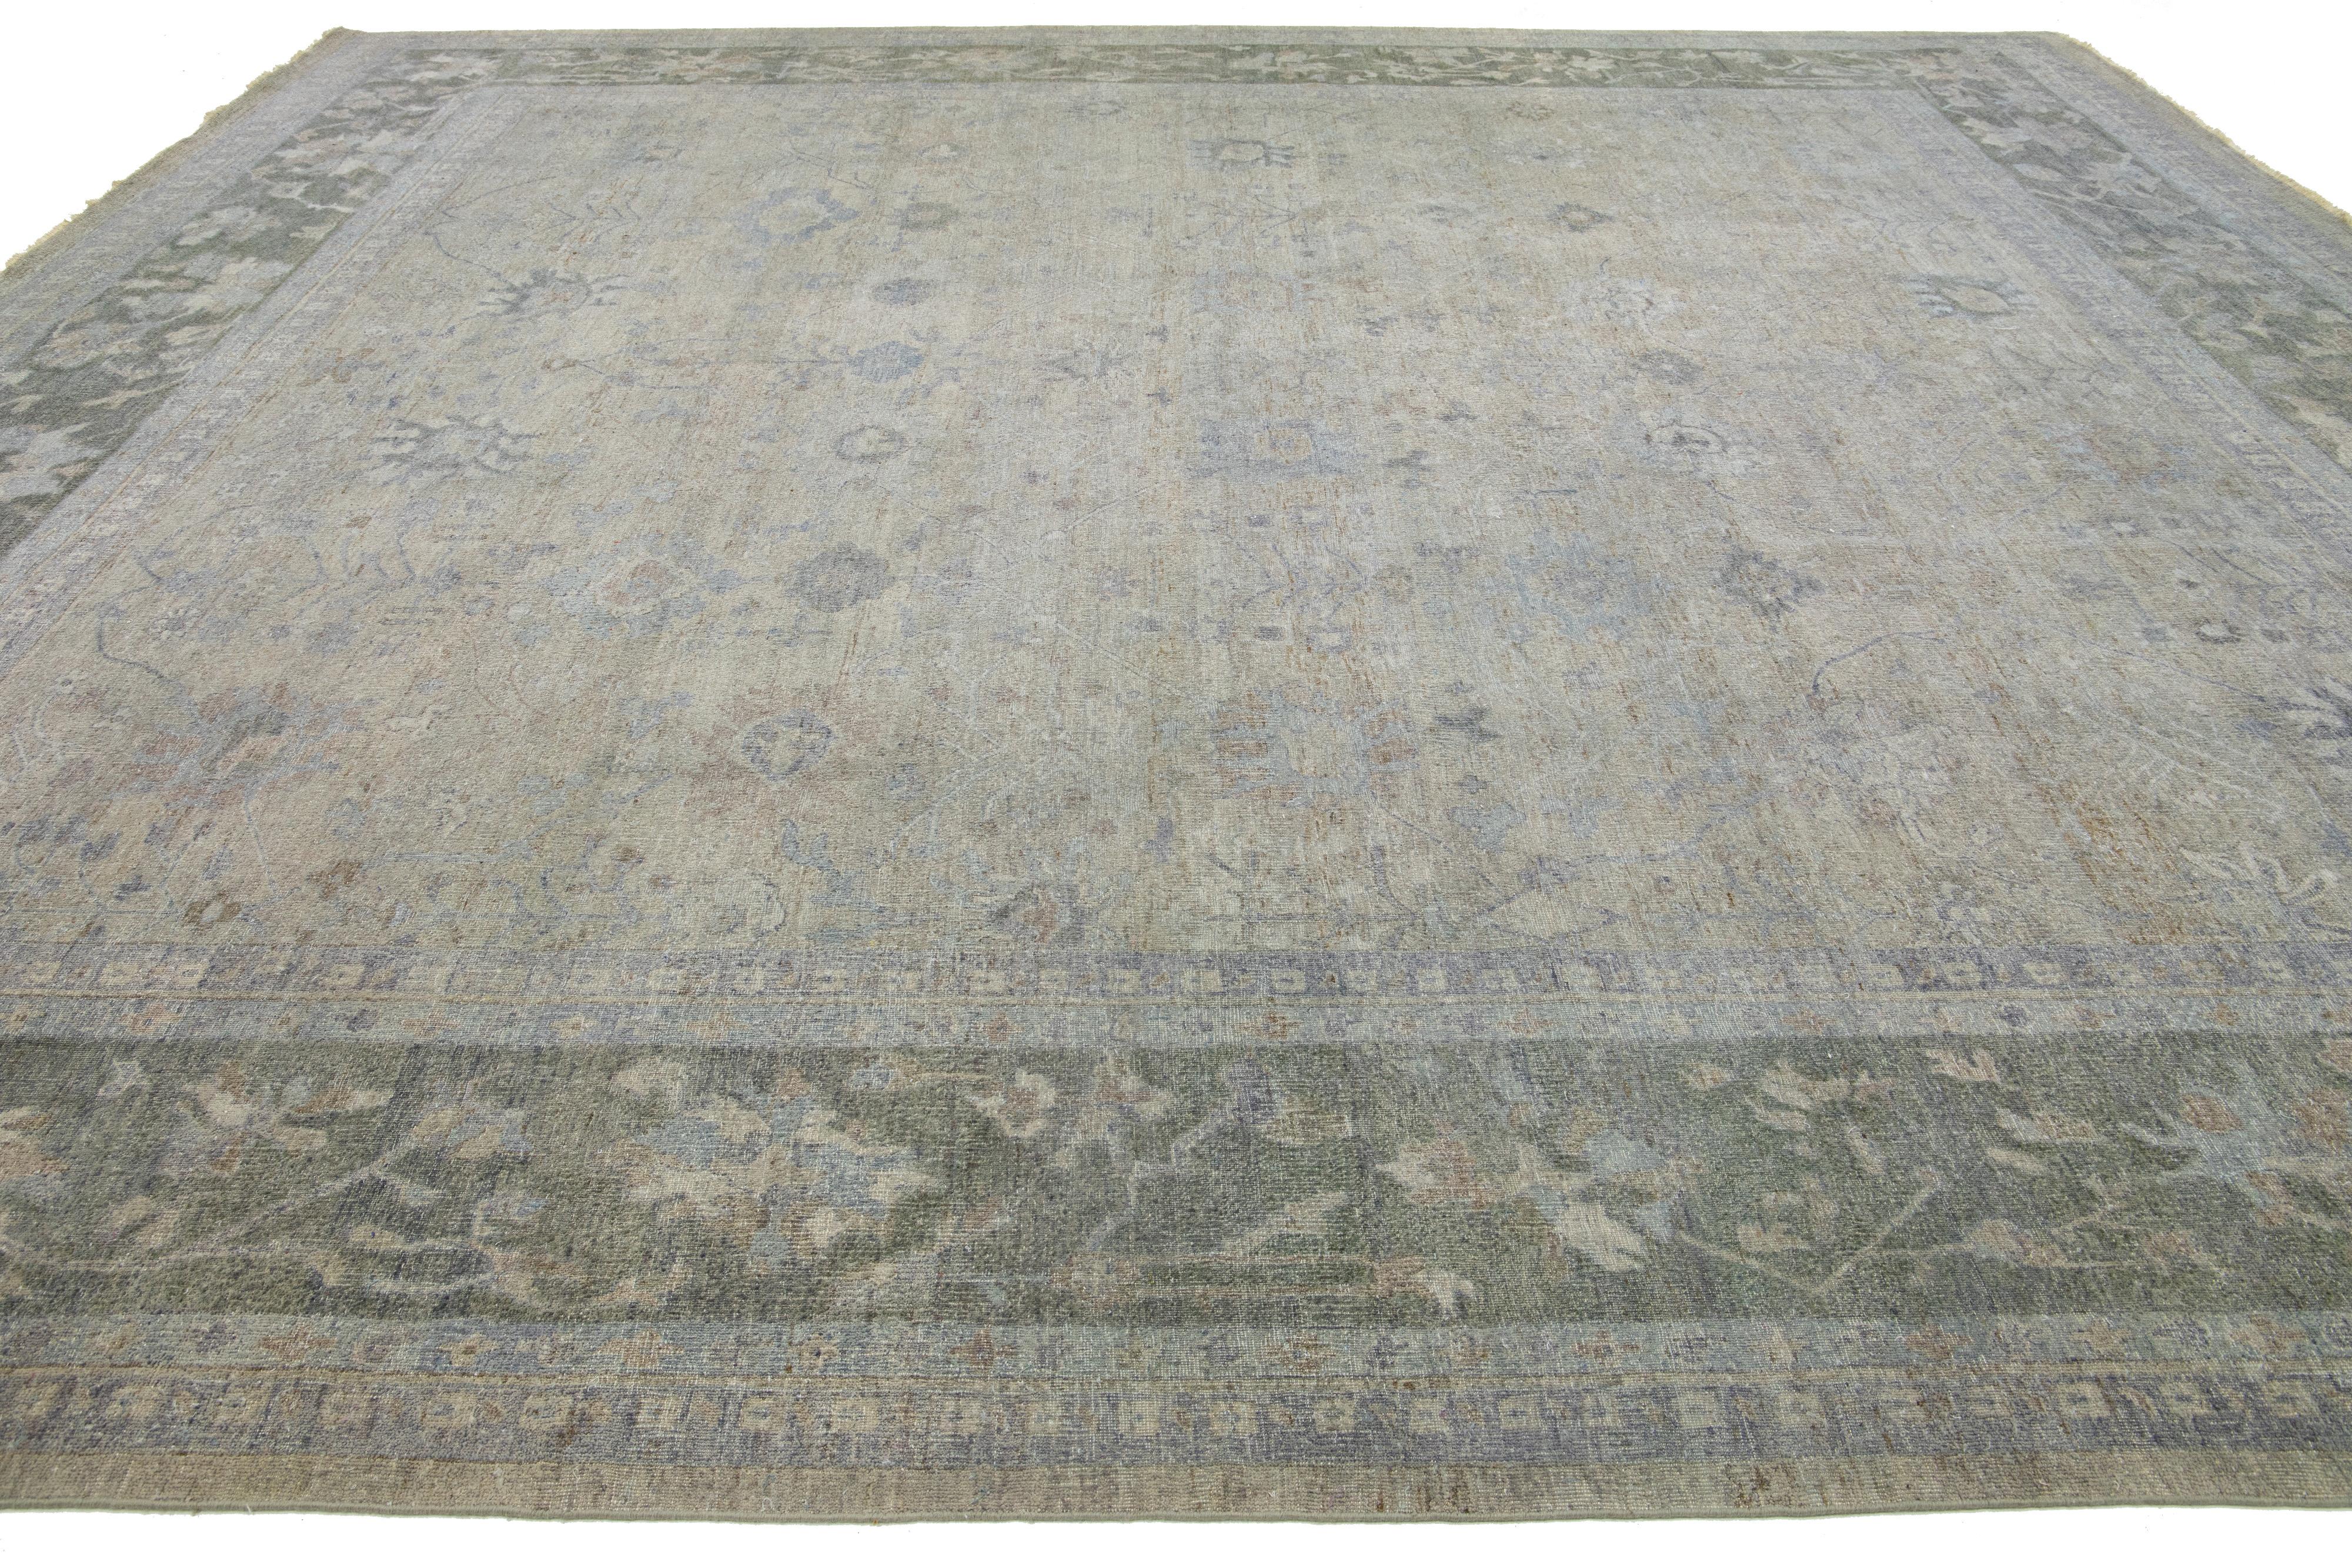 Gray Indian Modern Mahal Square Wool Rug Handmade With Allover Motif by Apadana In New Condition For Sale In Norwalk, CT